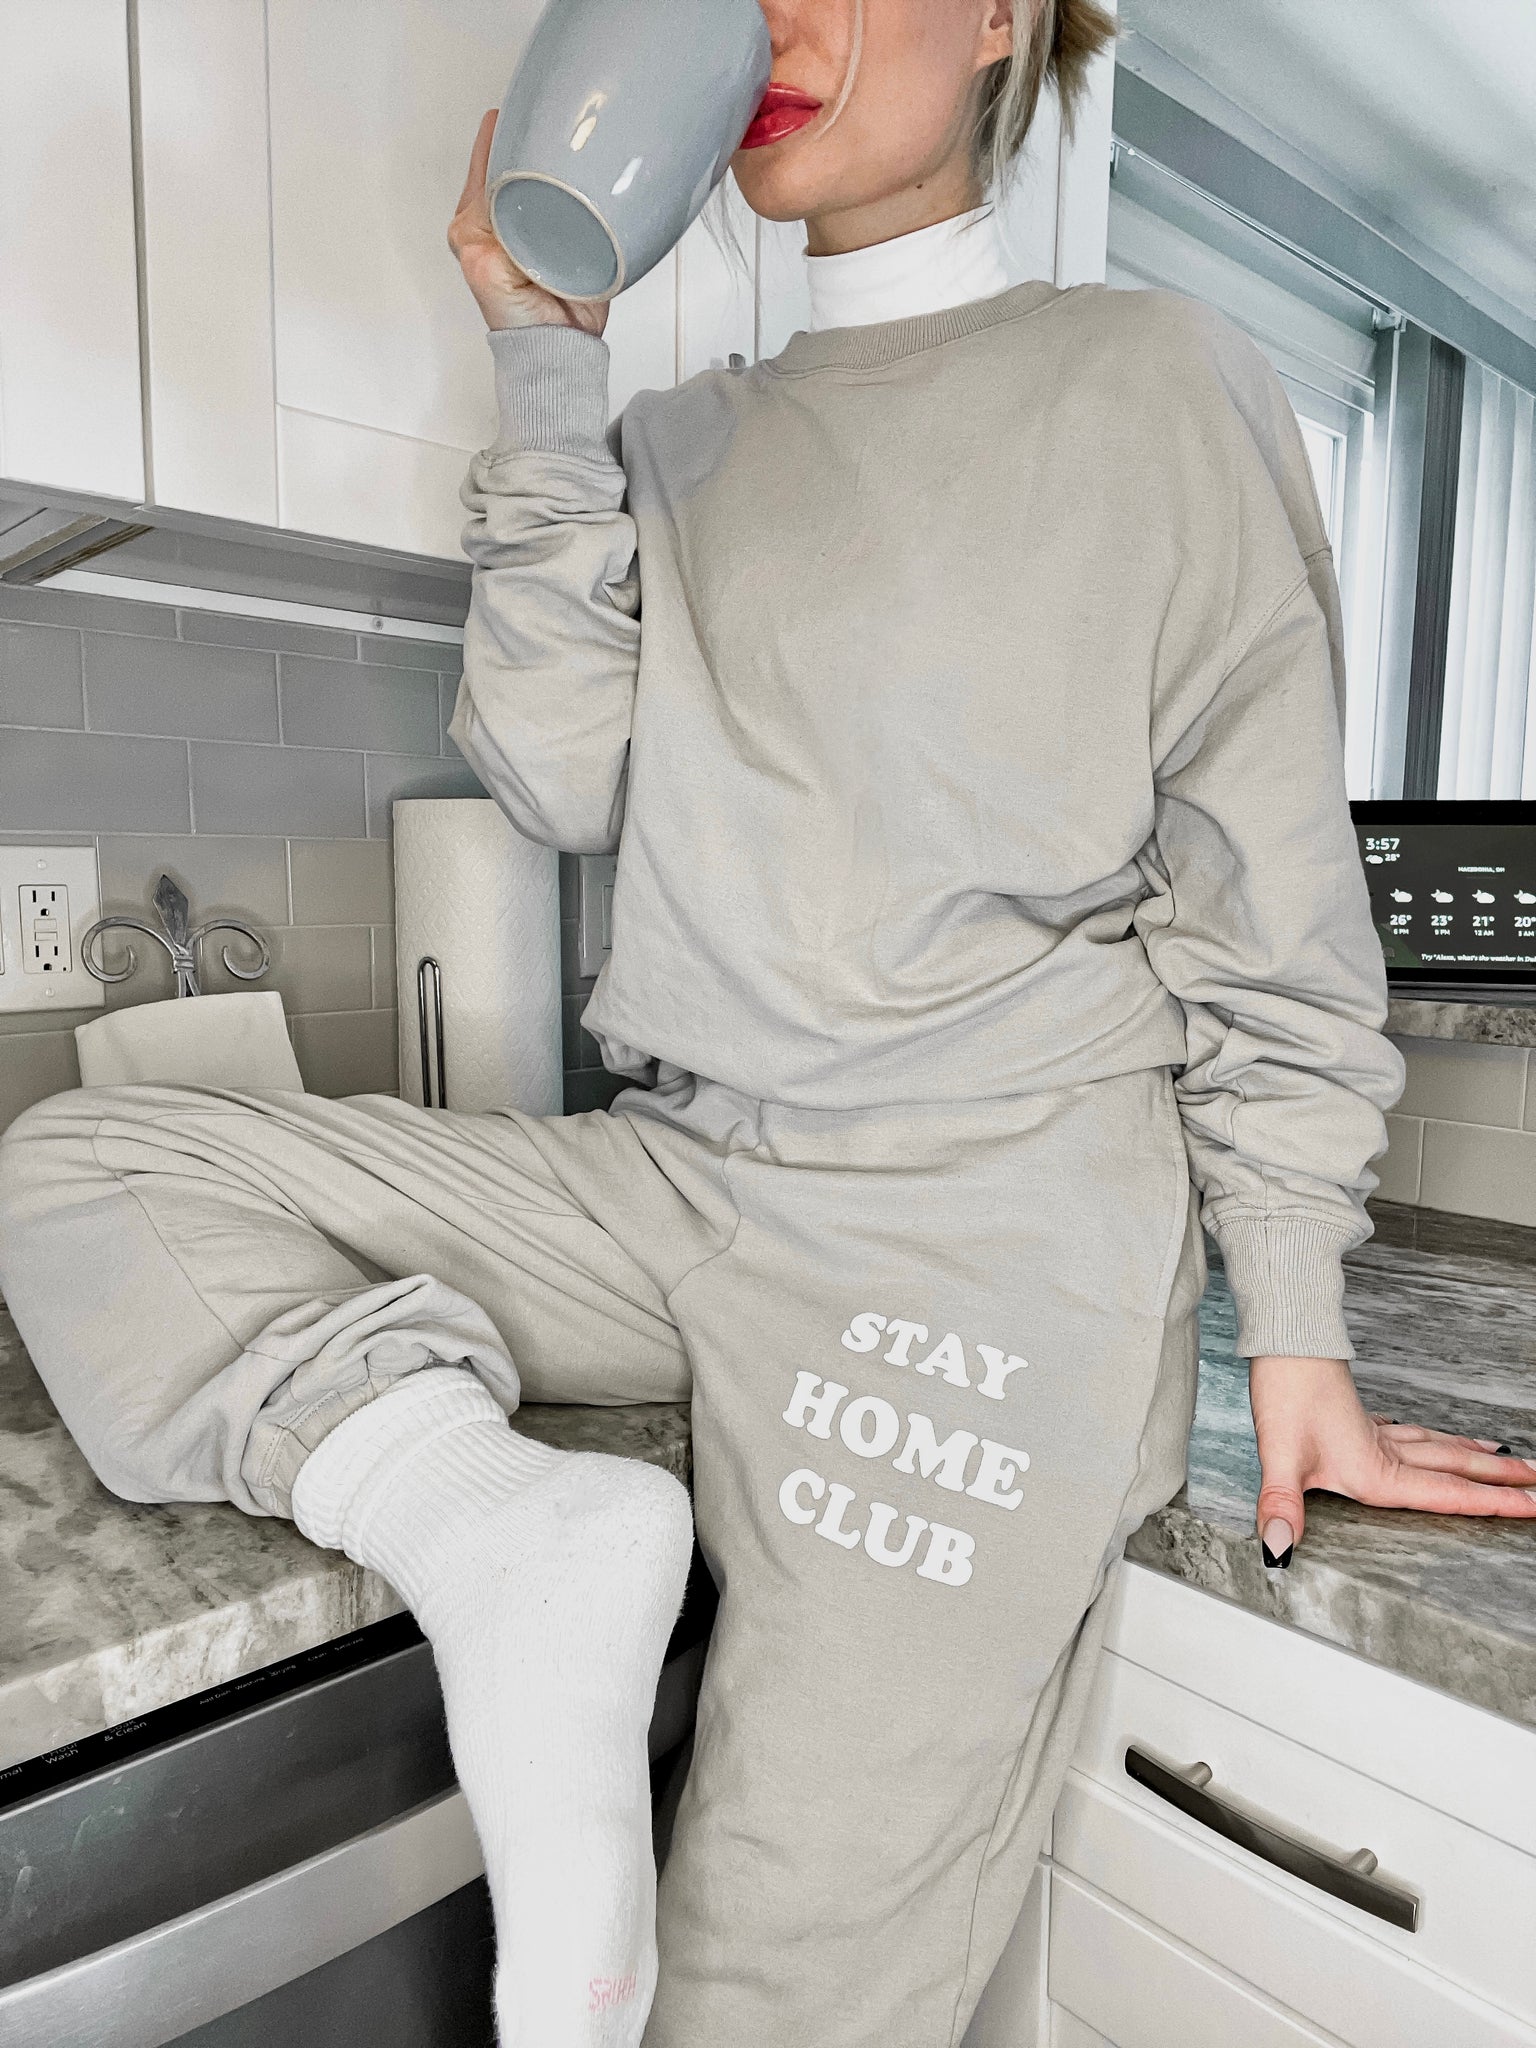 Stay Home Club Joggers